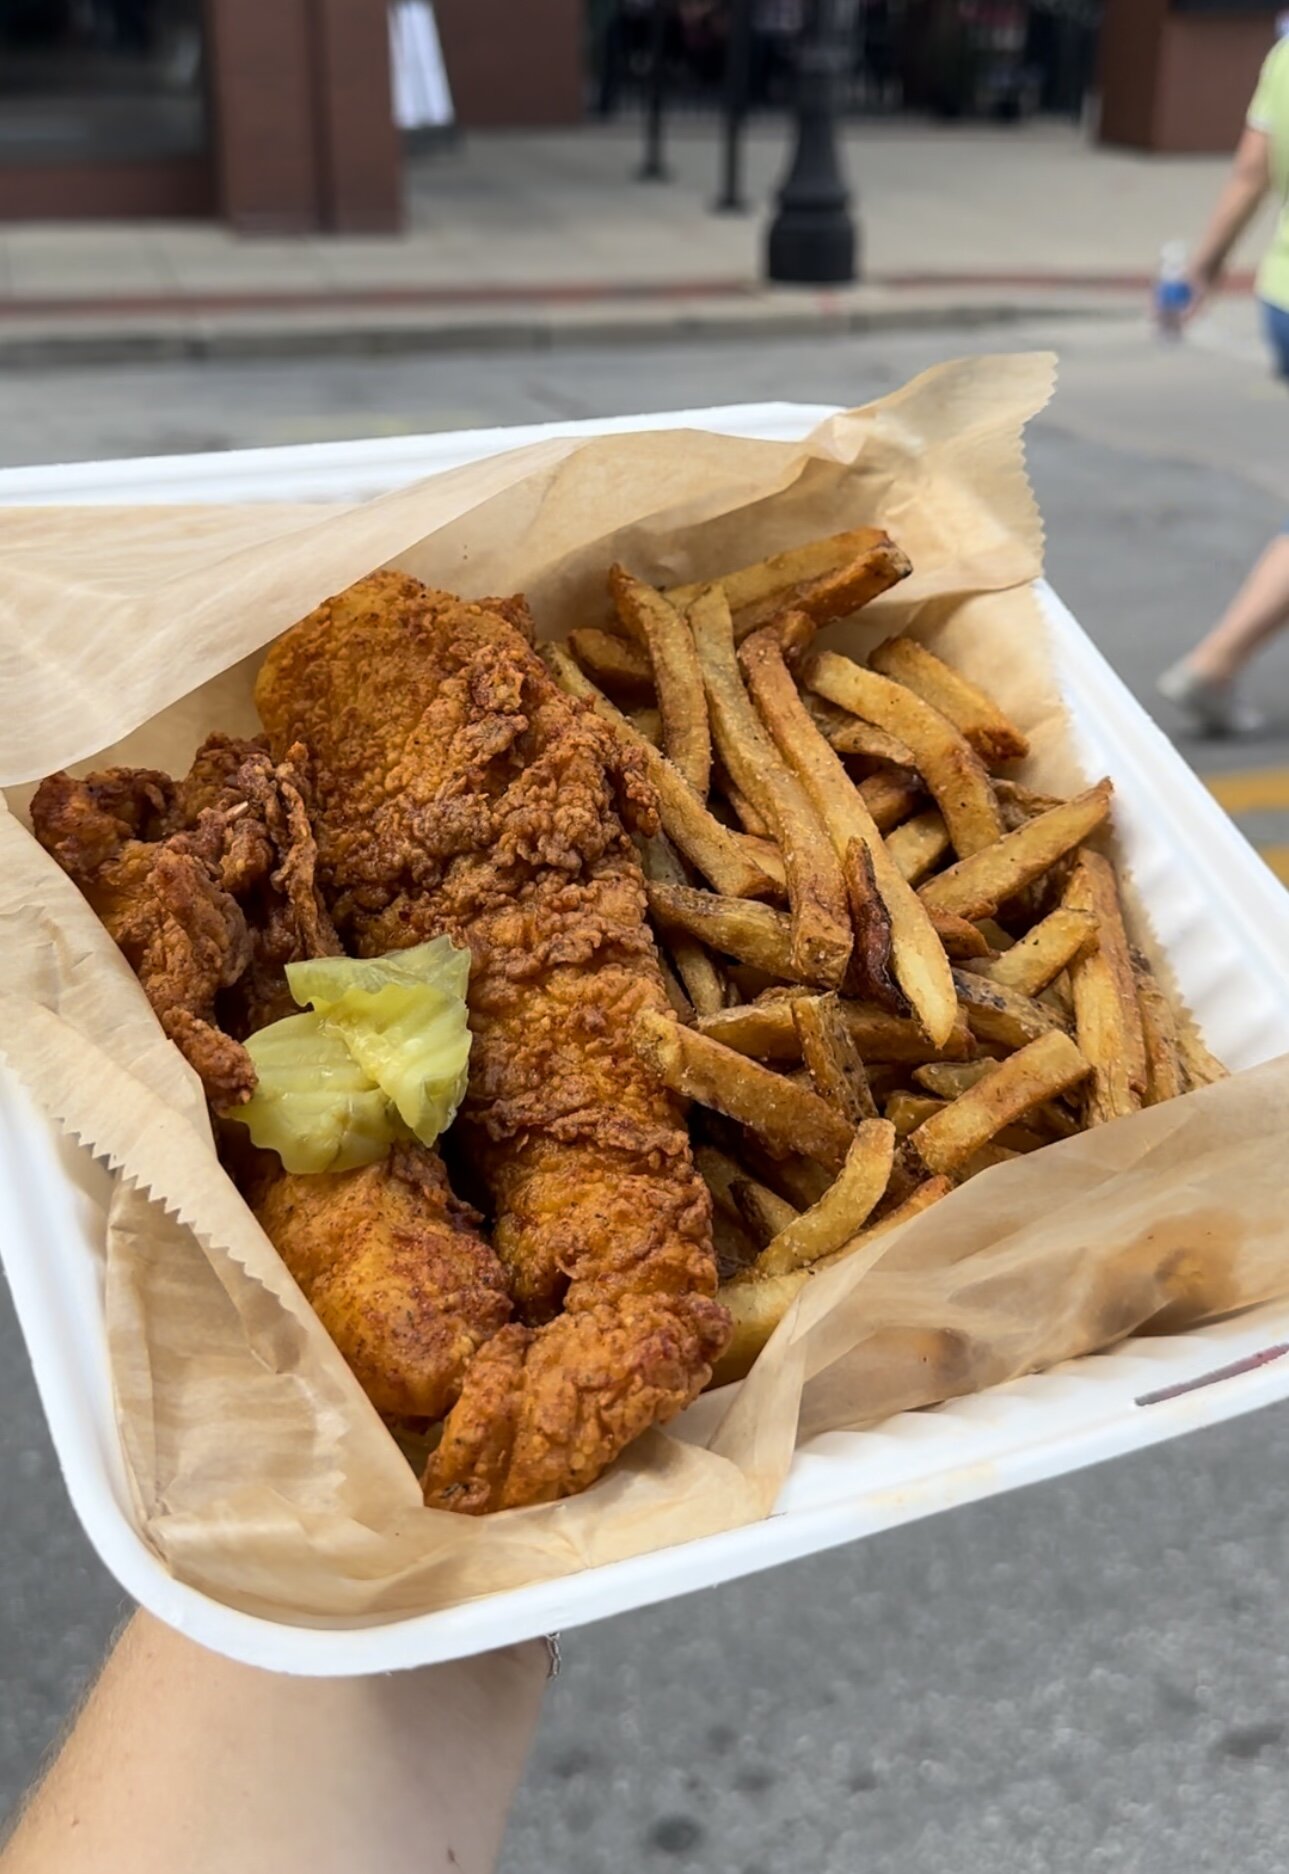 Tenders from The Spicy Bird.